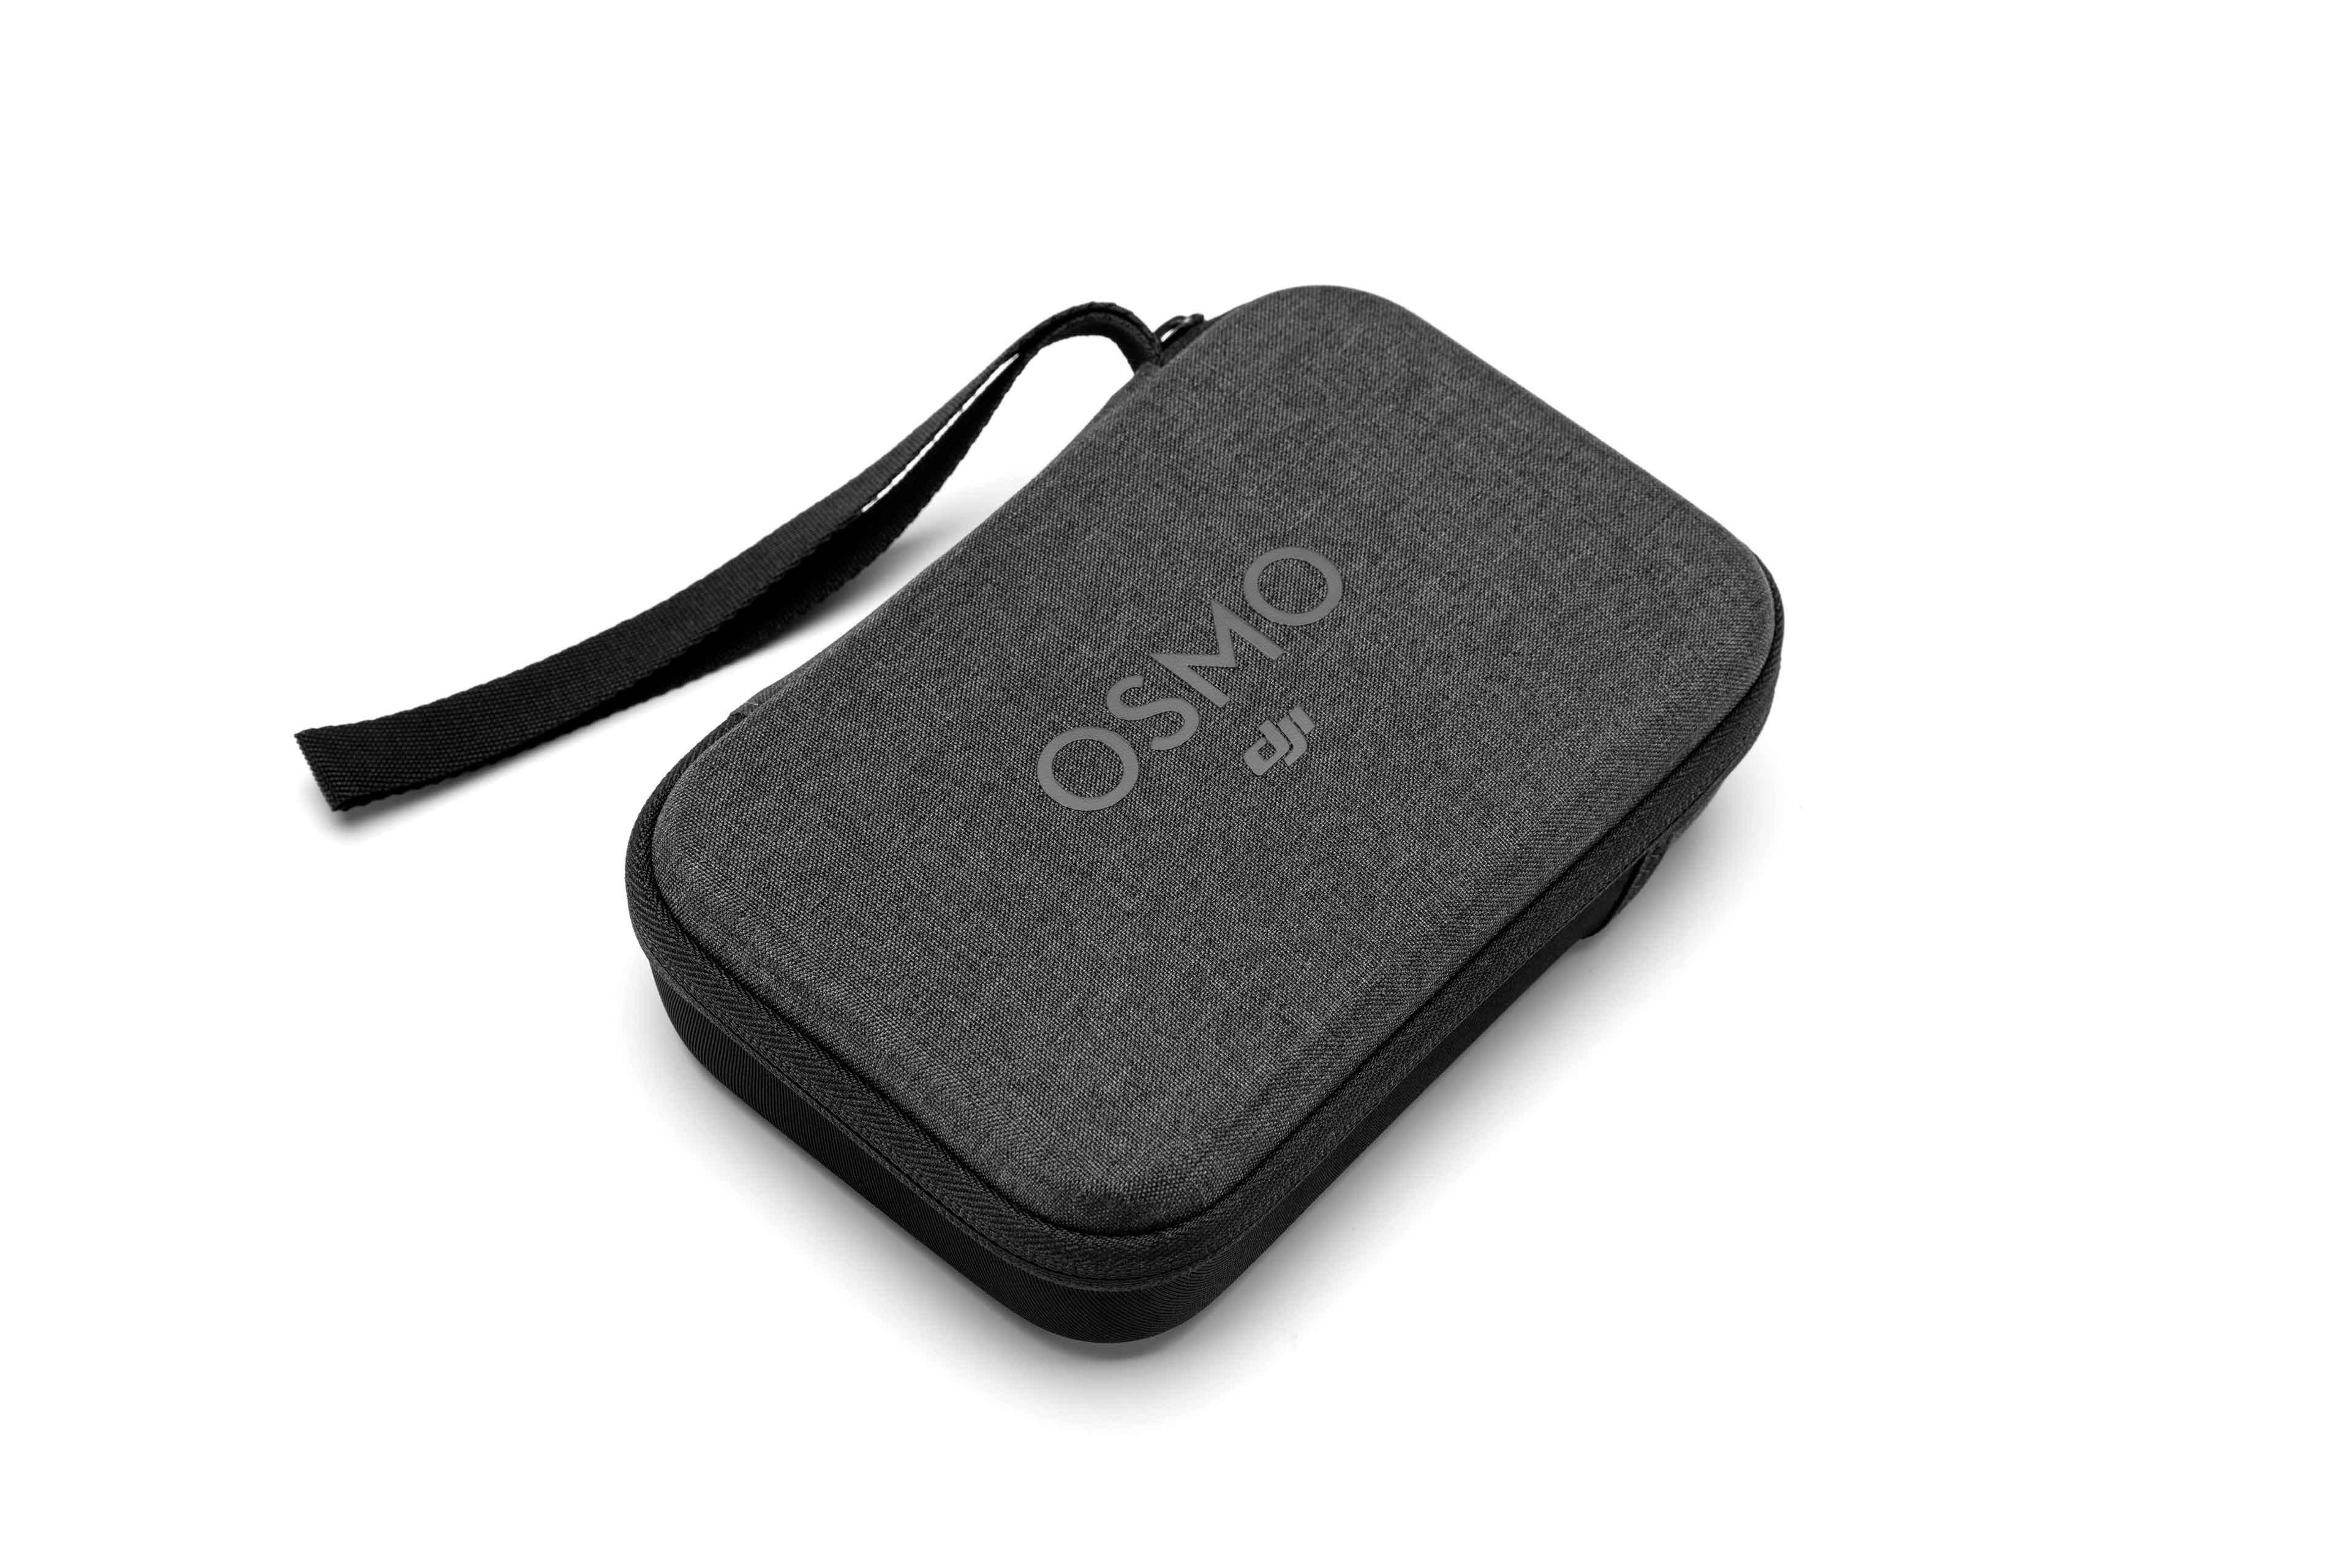 Osmo Mobile 3 Part 2 Carrying Case